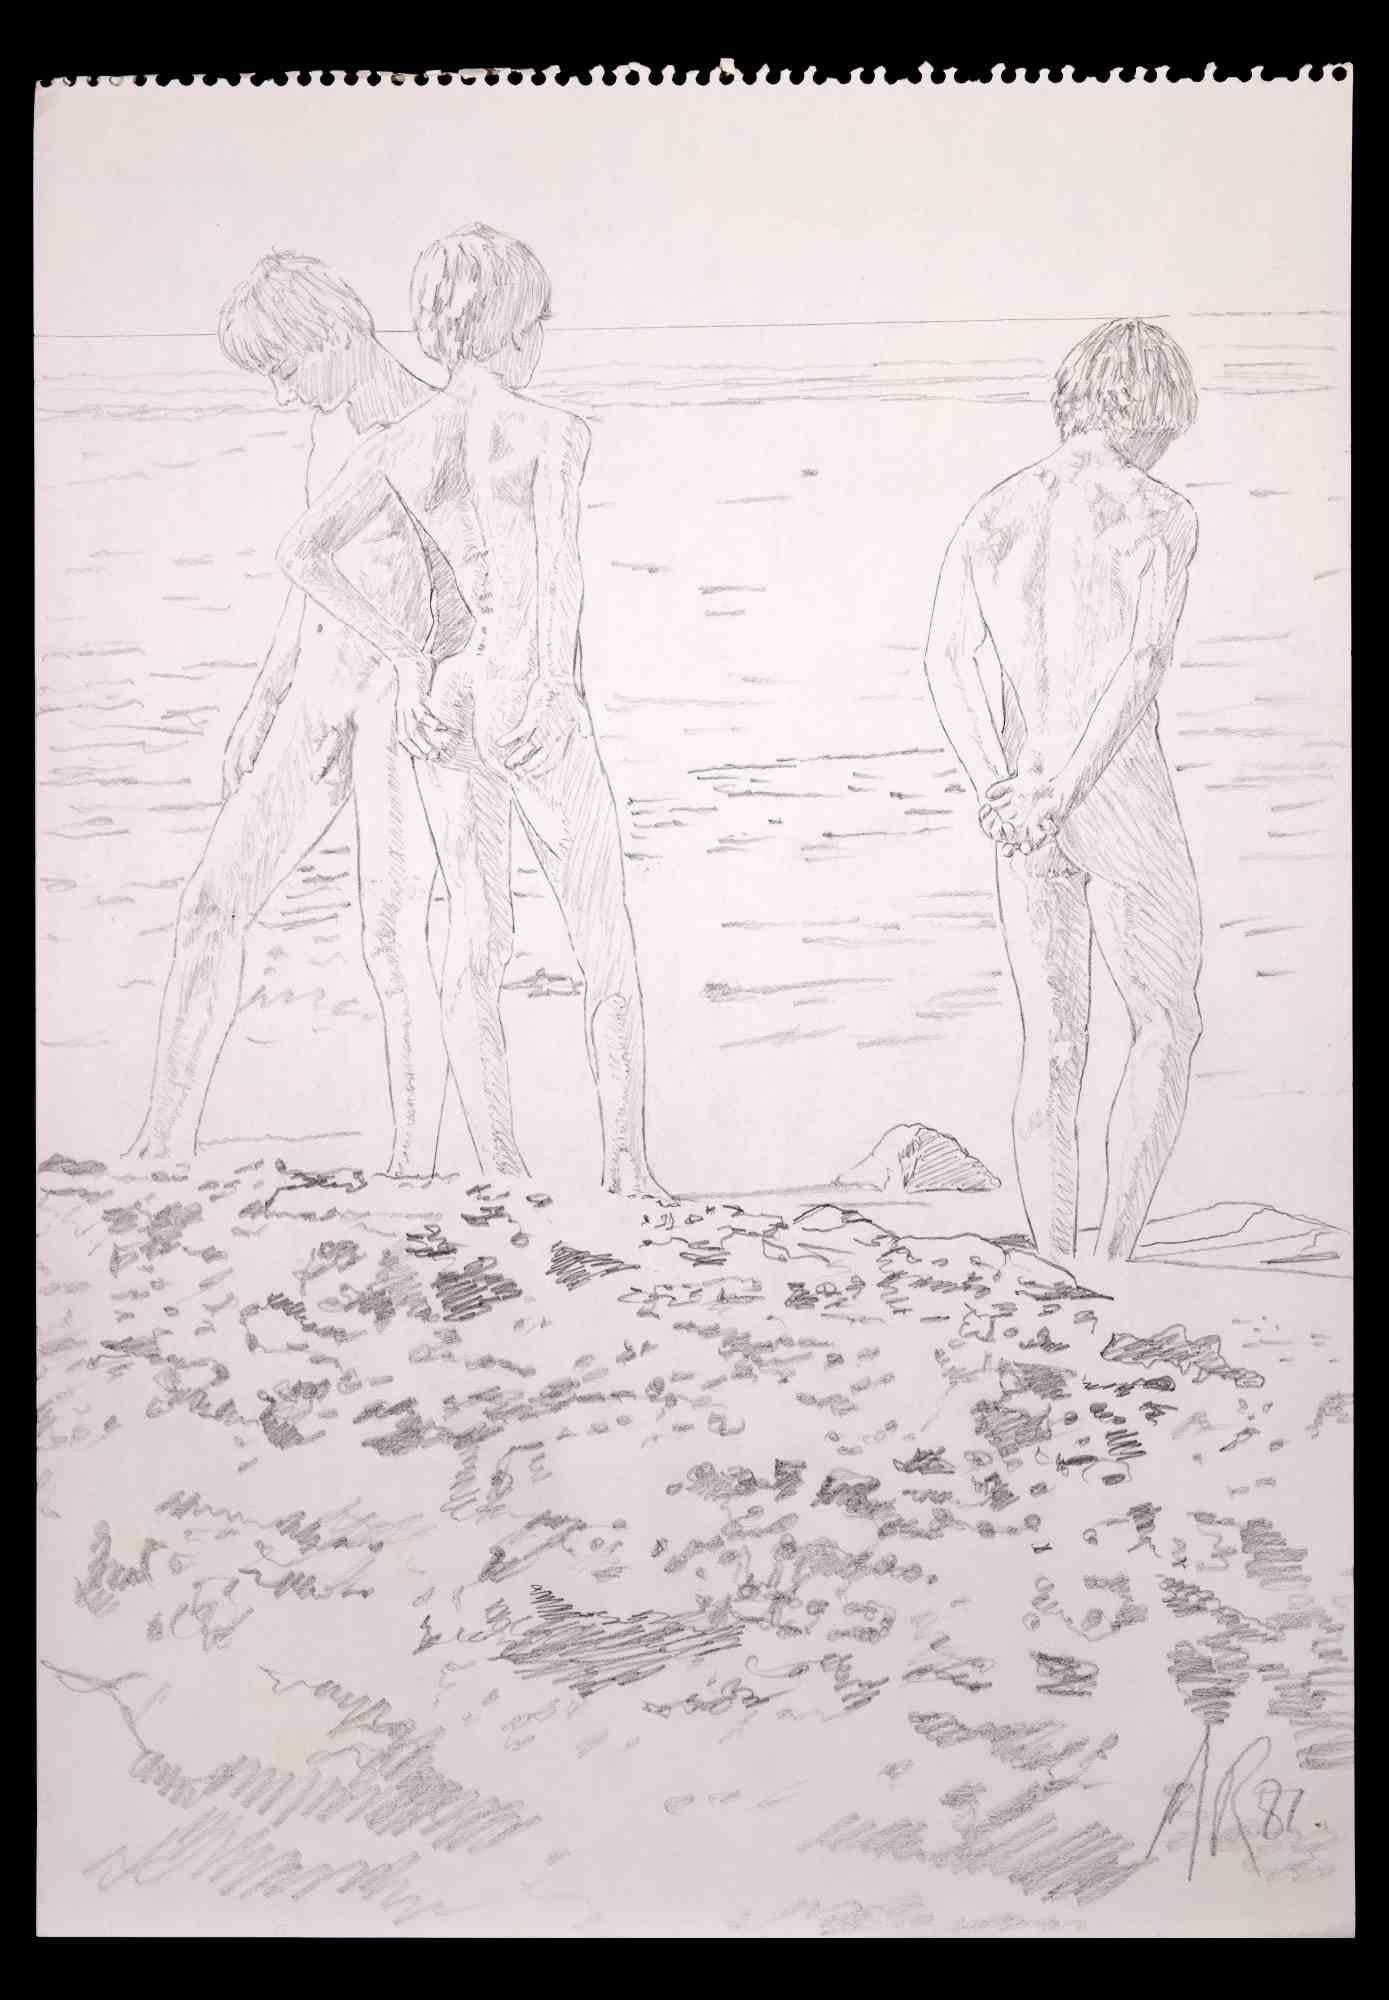 Teens at the Beach - Original Drawing by Anthony Roaland - 1982